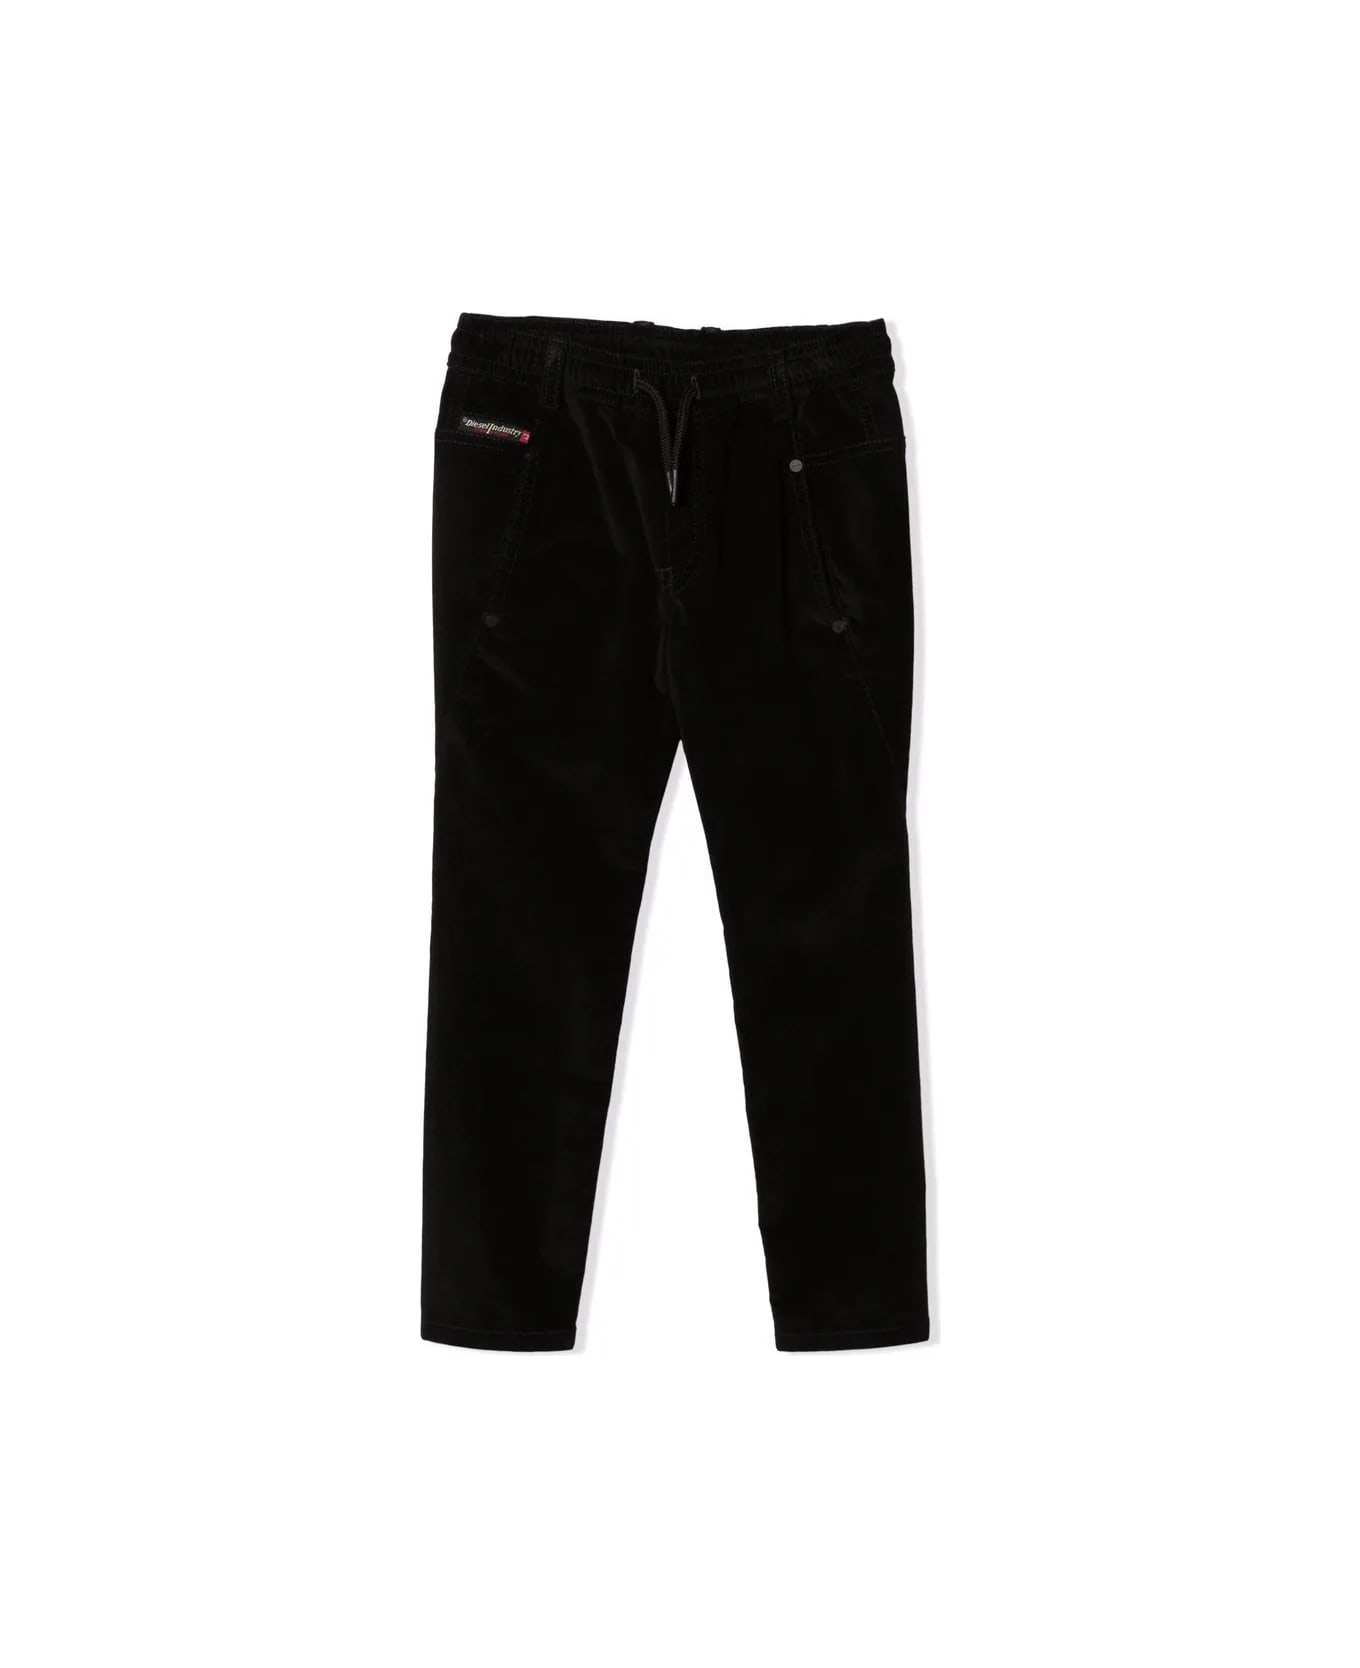 Diesel Tapered Trousers - Black ボトムス